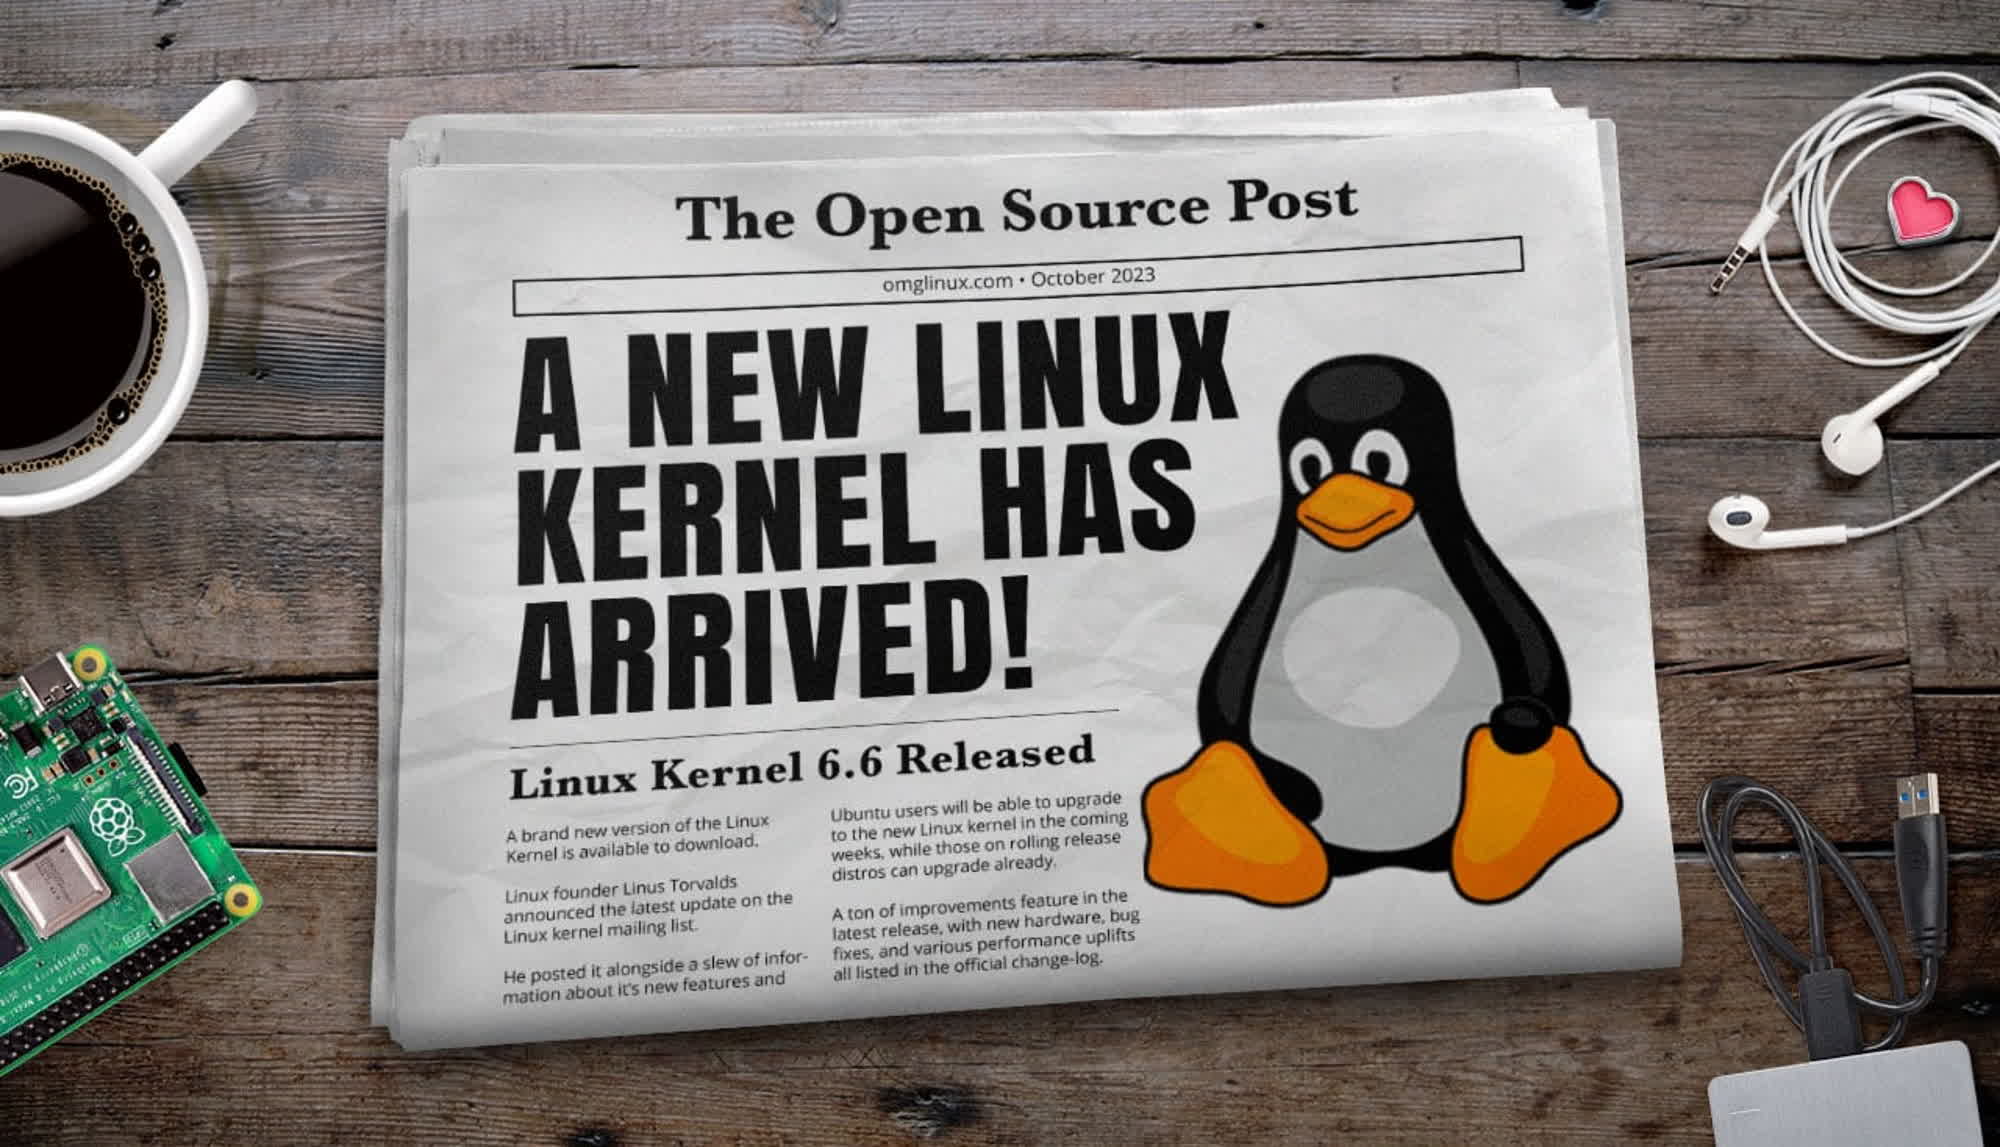 Tuning the Linux kernel with AI brings significant performance improvements